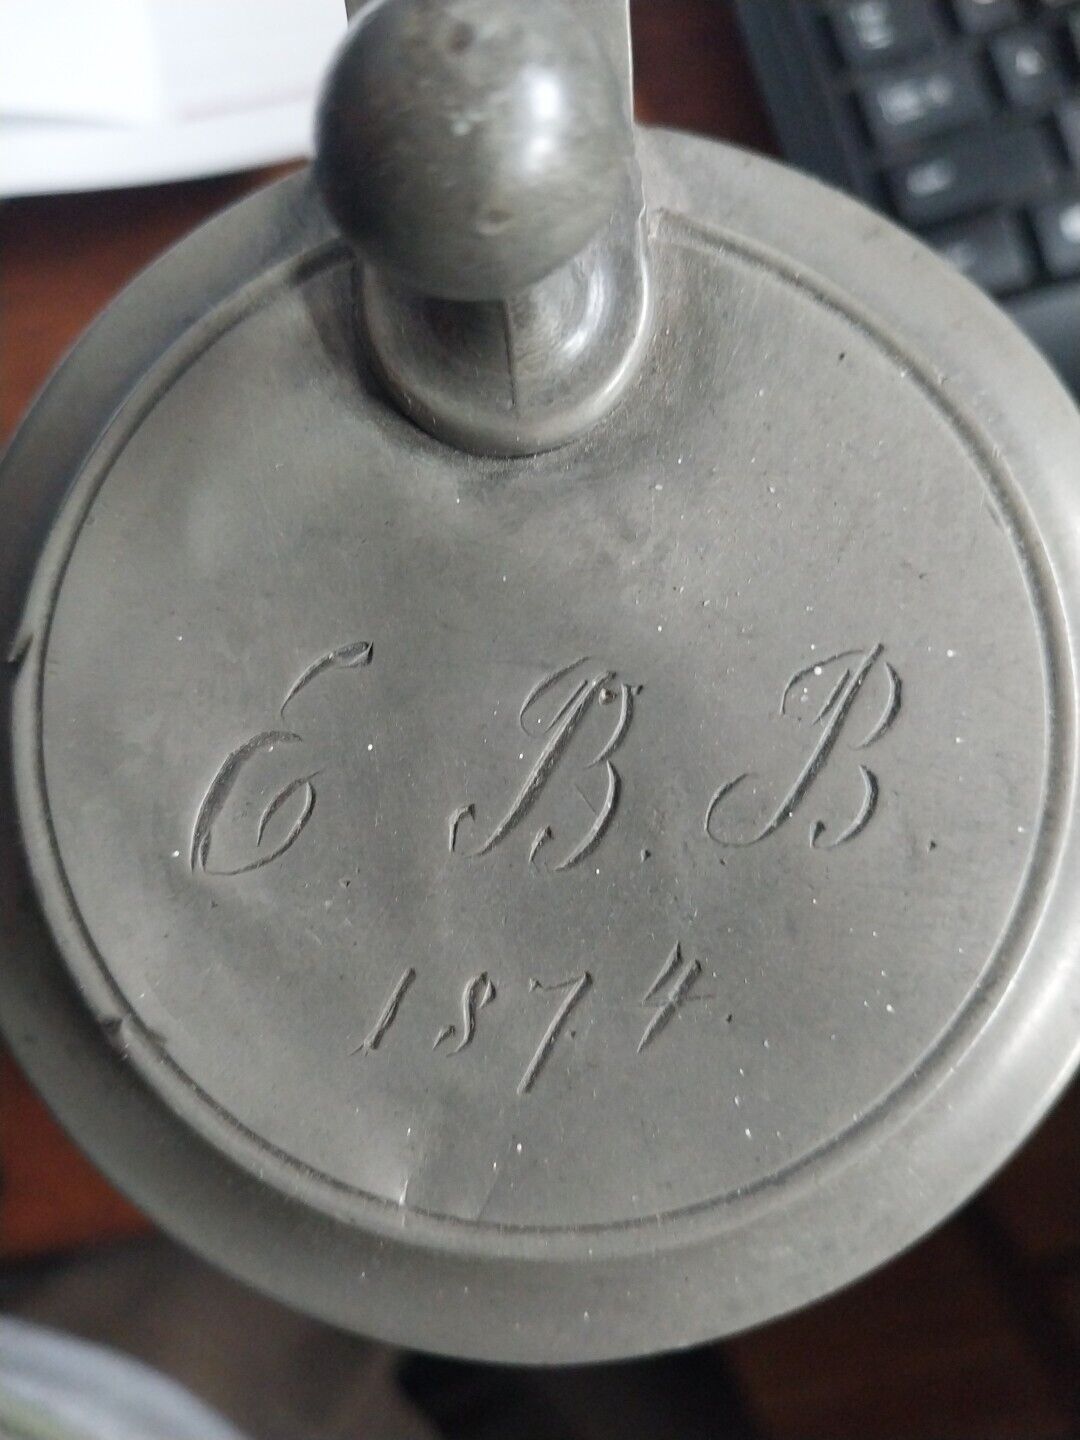 Pewter Tankard engraved on top 1878 seems pretty damn old to me (like me) Herold